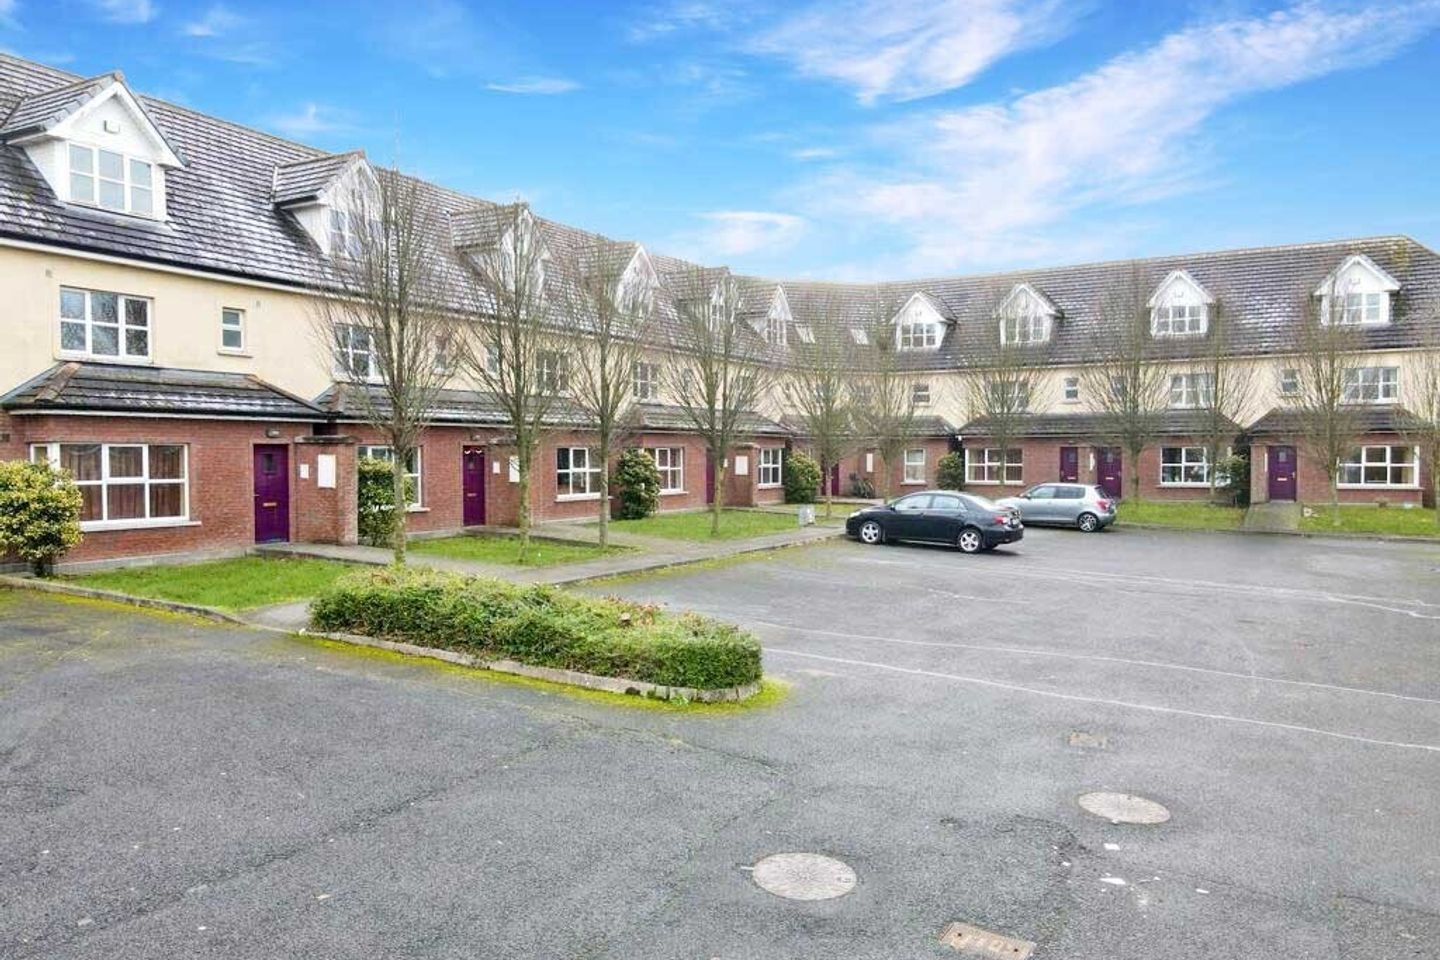 16-20 The Lodges, Dublin Road, Nenagh, Co. Tipperary